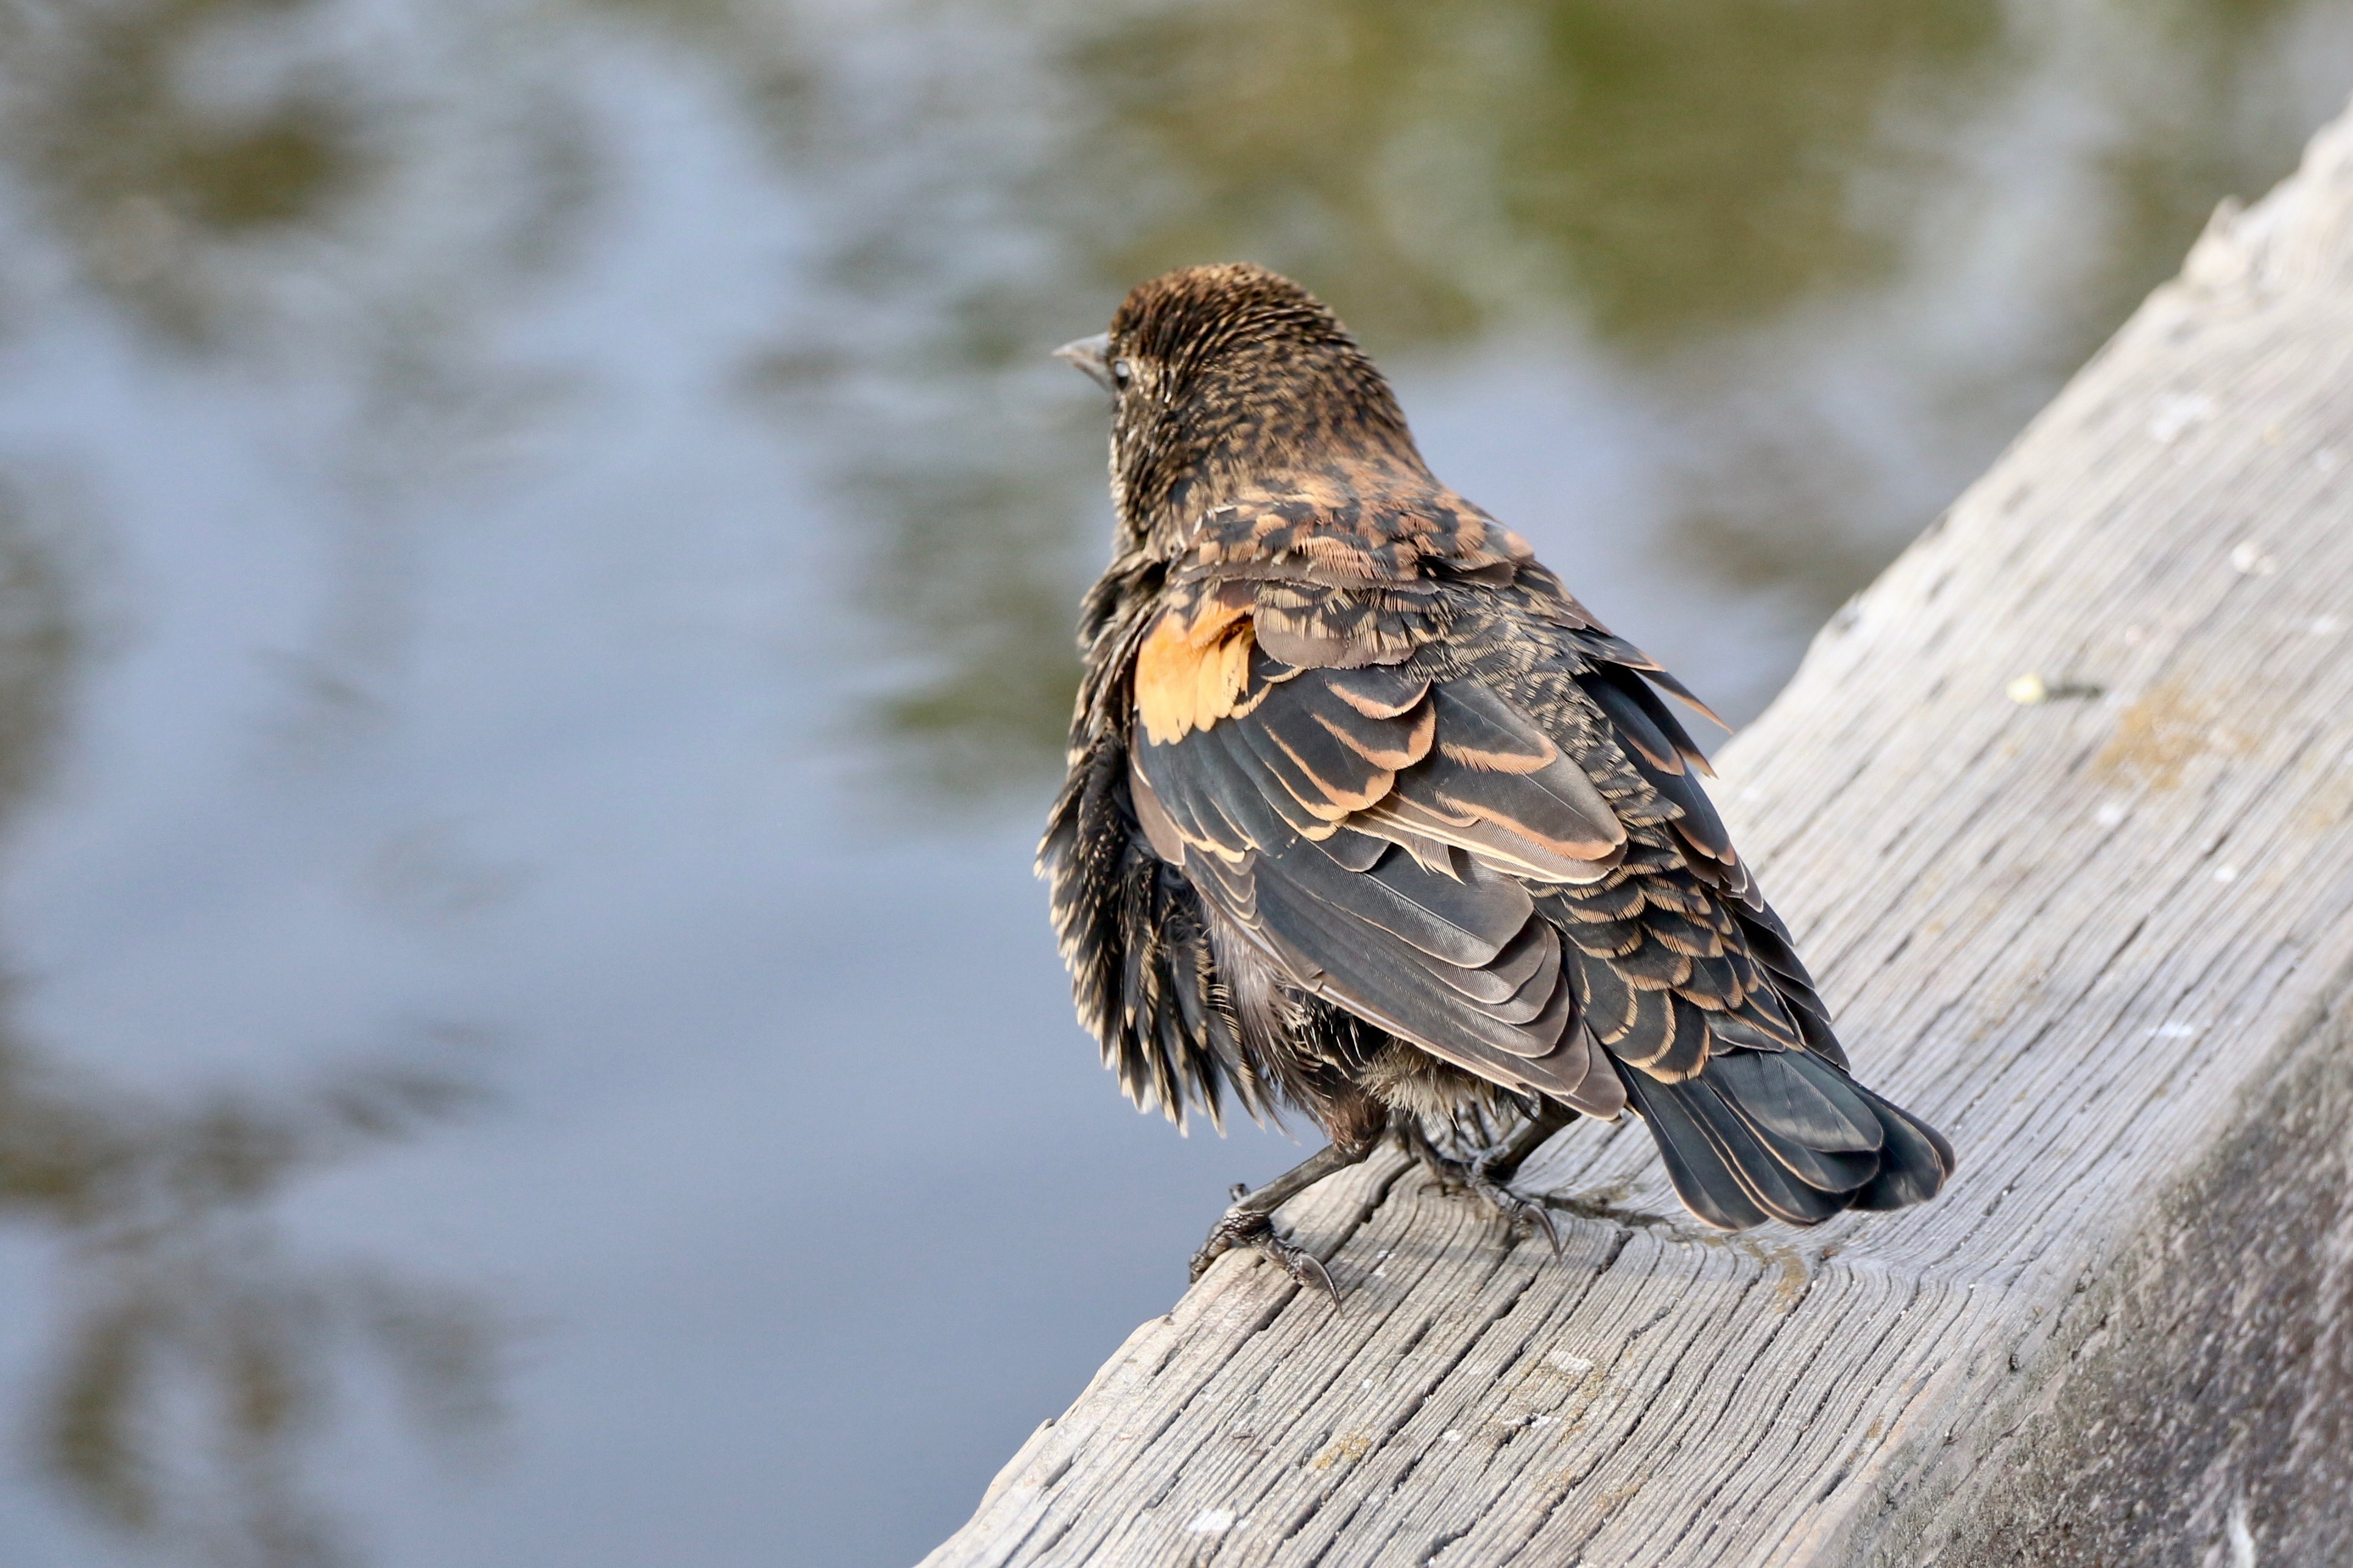 A juvenile male red-winged blackbird fluffs its feathers at the edge of a pier to warm up because it is now fall weather. This bird has gorgeous, intricate brown and buffy streaks all over its body, and a little yellow patch where it will probably eventually grow a red and yellow shoulder patch as is characteristic for male red-winged blackbirds.
